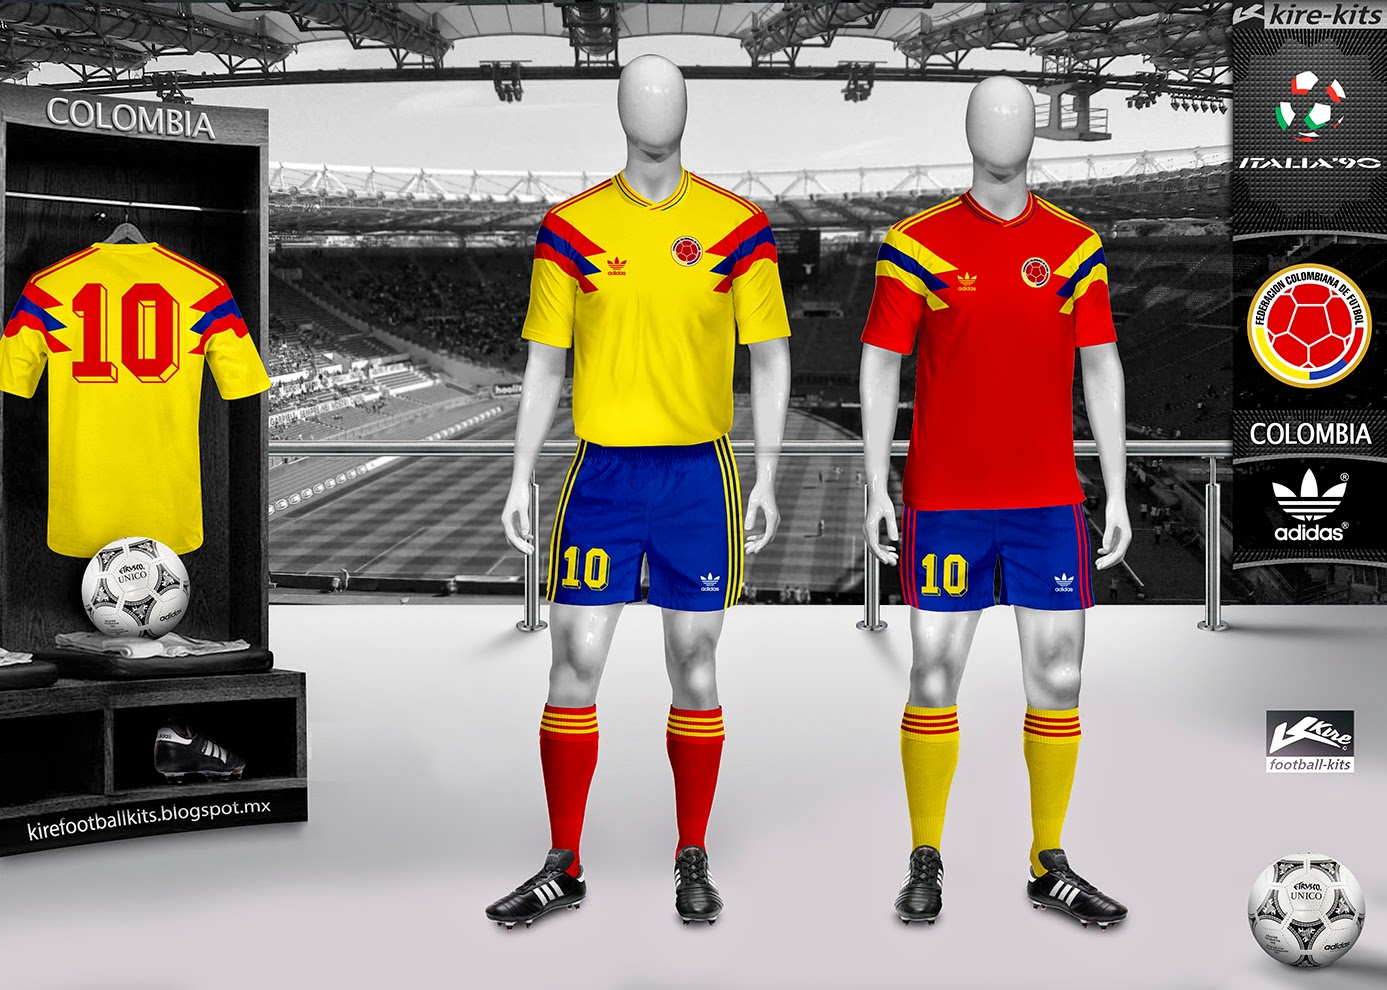 Colombia+Home+and+Away+Kits+World+Cup+Italy+1990.jpg